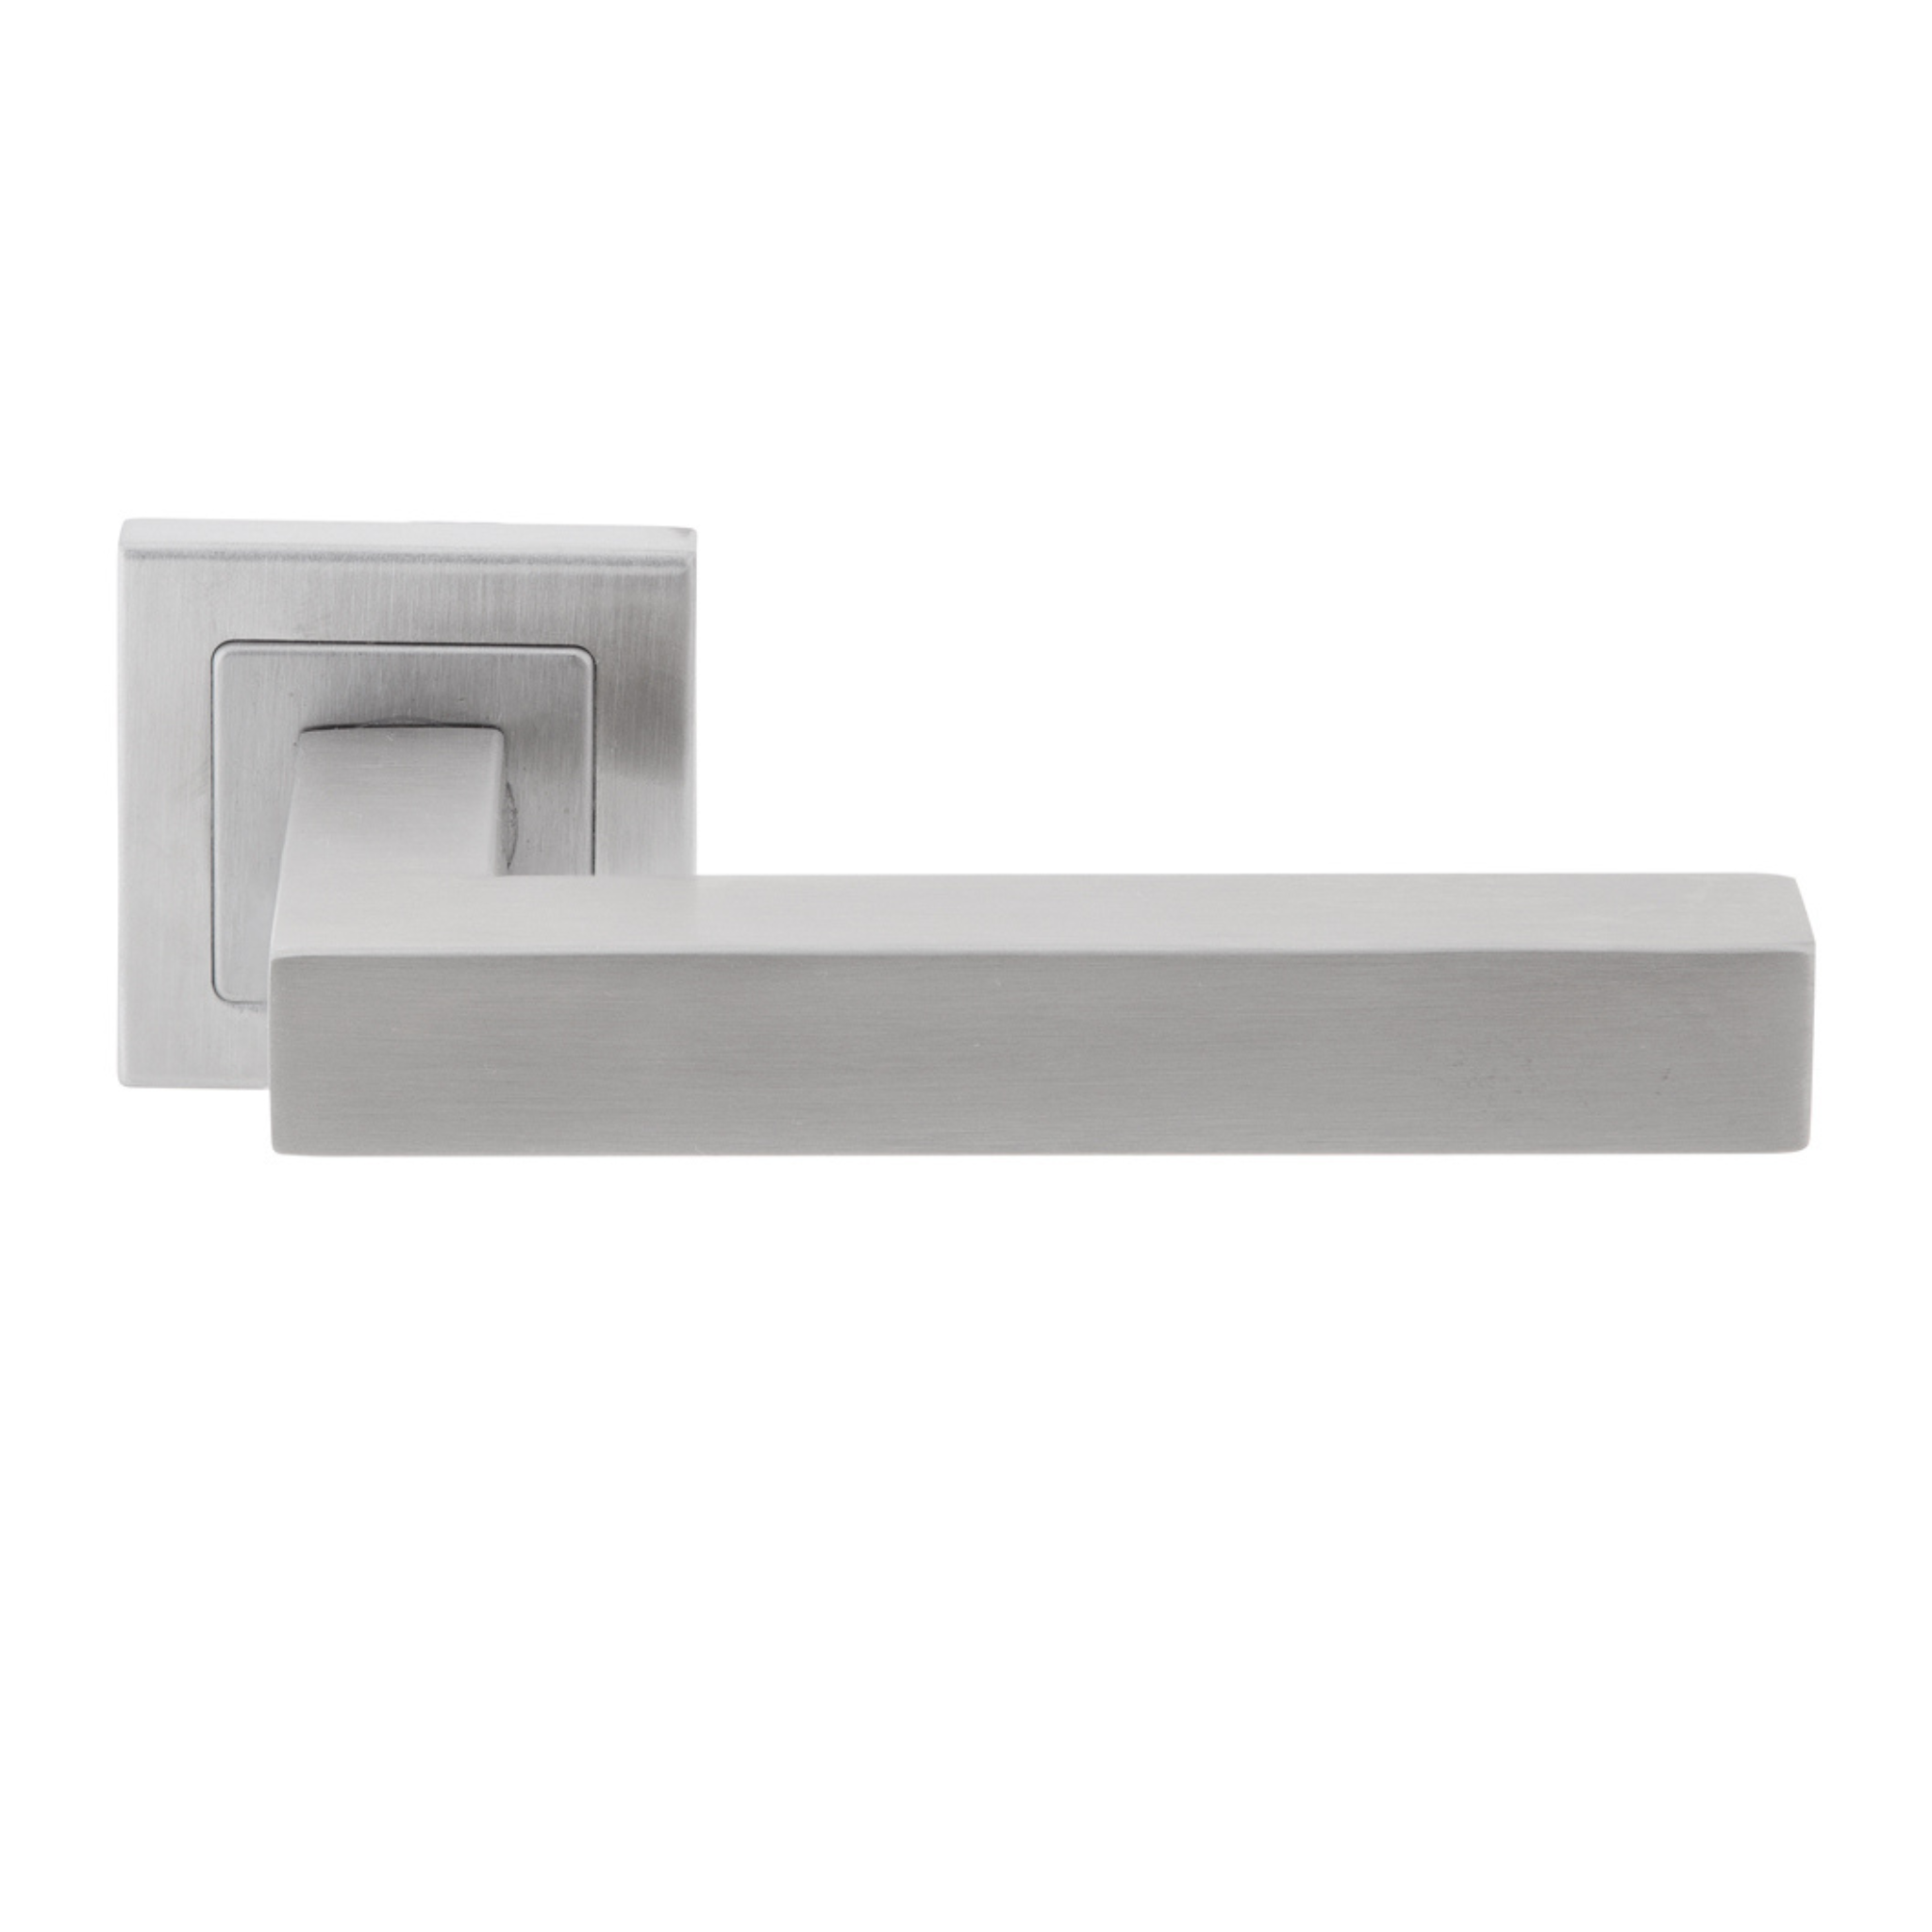 DSQ 901, Lever Handles, Square, On Square Rose, With Escutcheons, 143mm (l), Stainless Steel, DORMAKABA